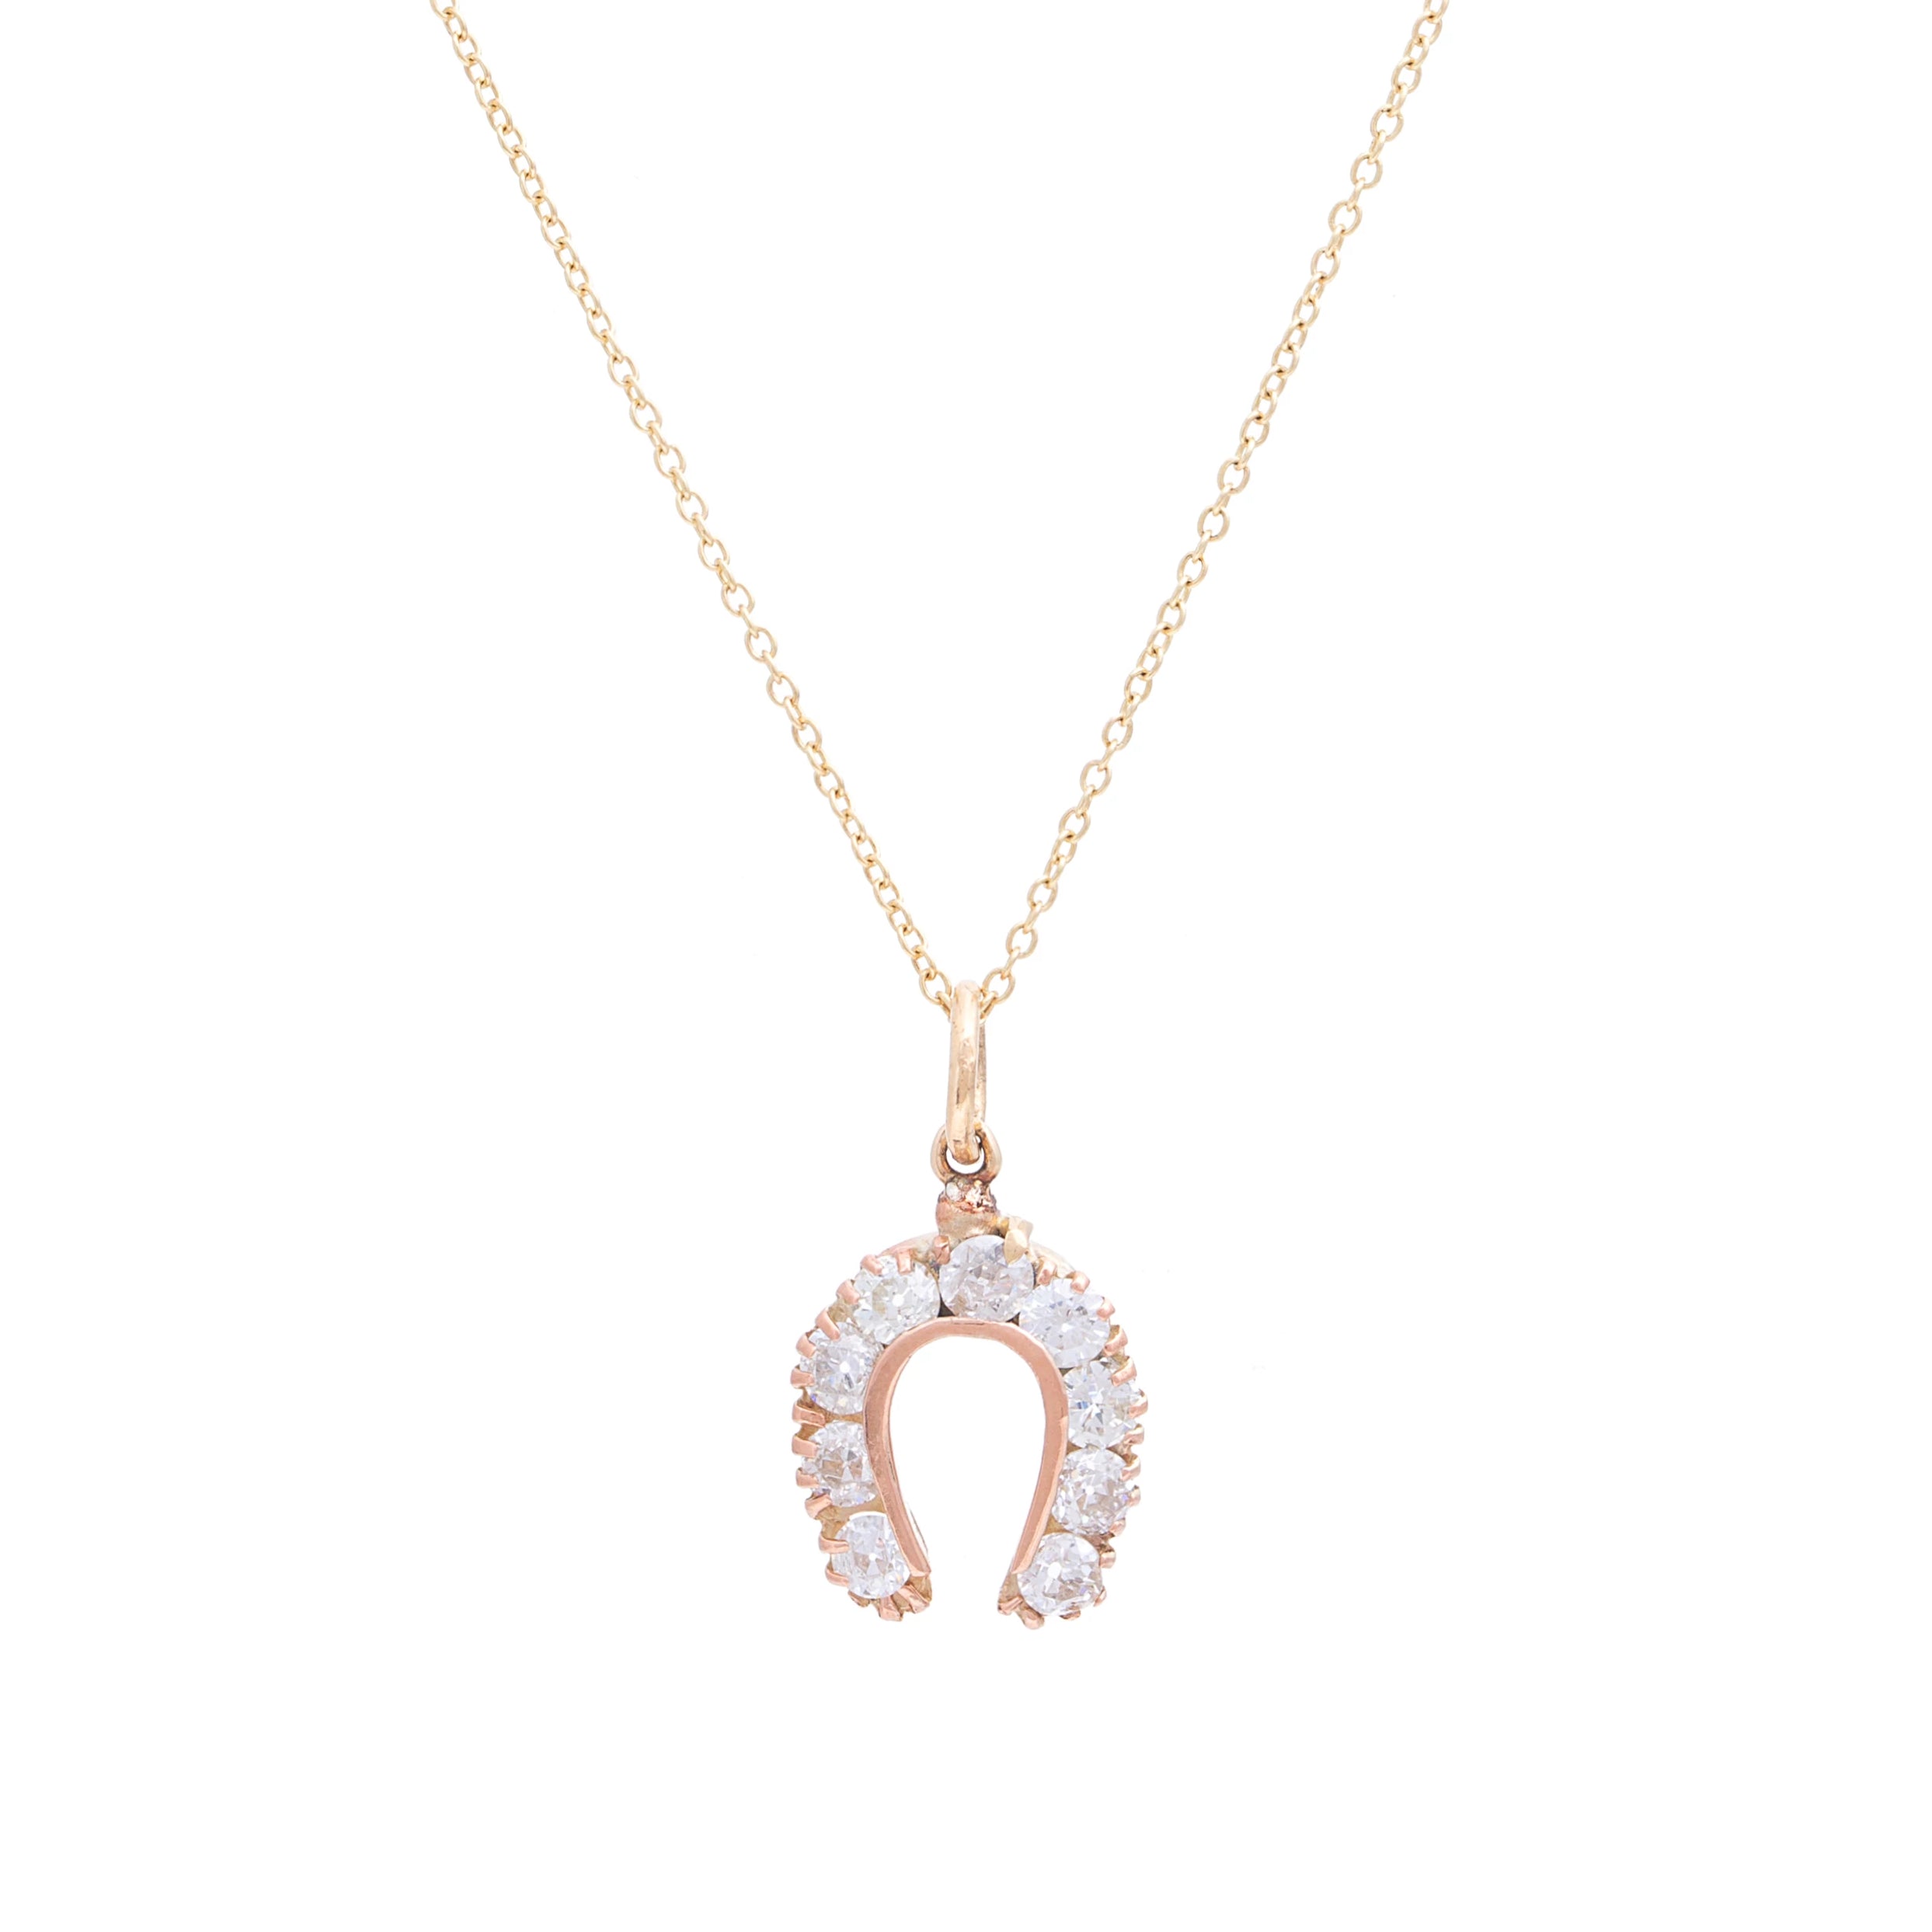 Diamond Jewelry - 1/6 CT TDW Diamond Horseshoe Pendant with Chain in Yellow  Plated Sterling Silver - Discounts for Veterans, VA employees and their  families! | Veterans Canteen Service